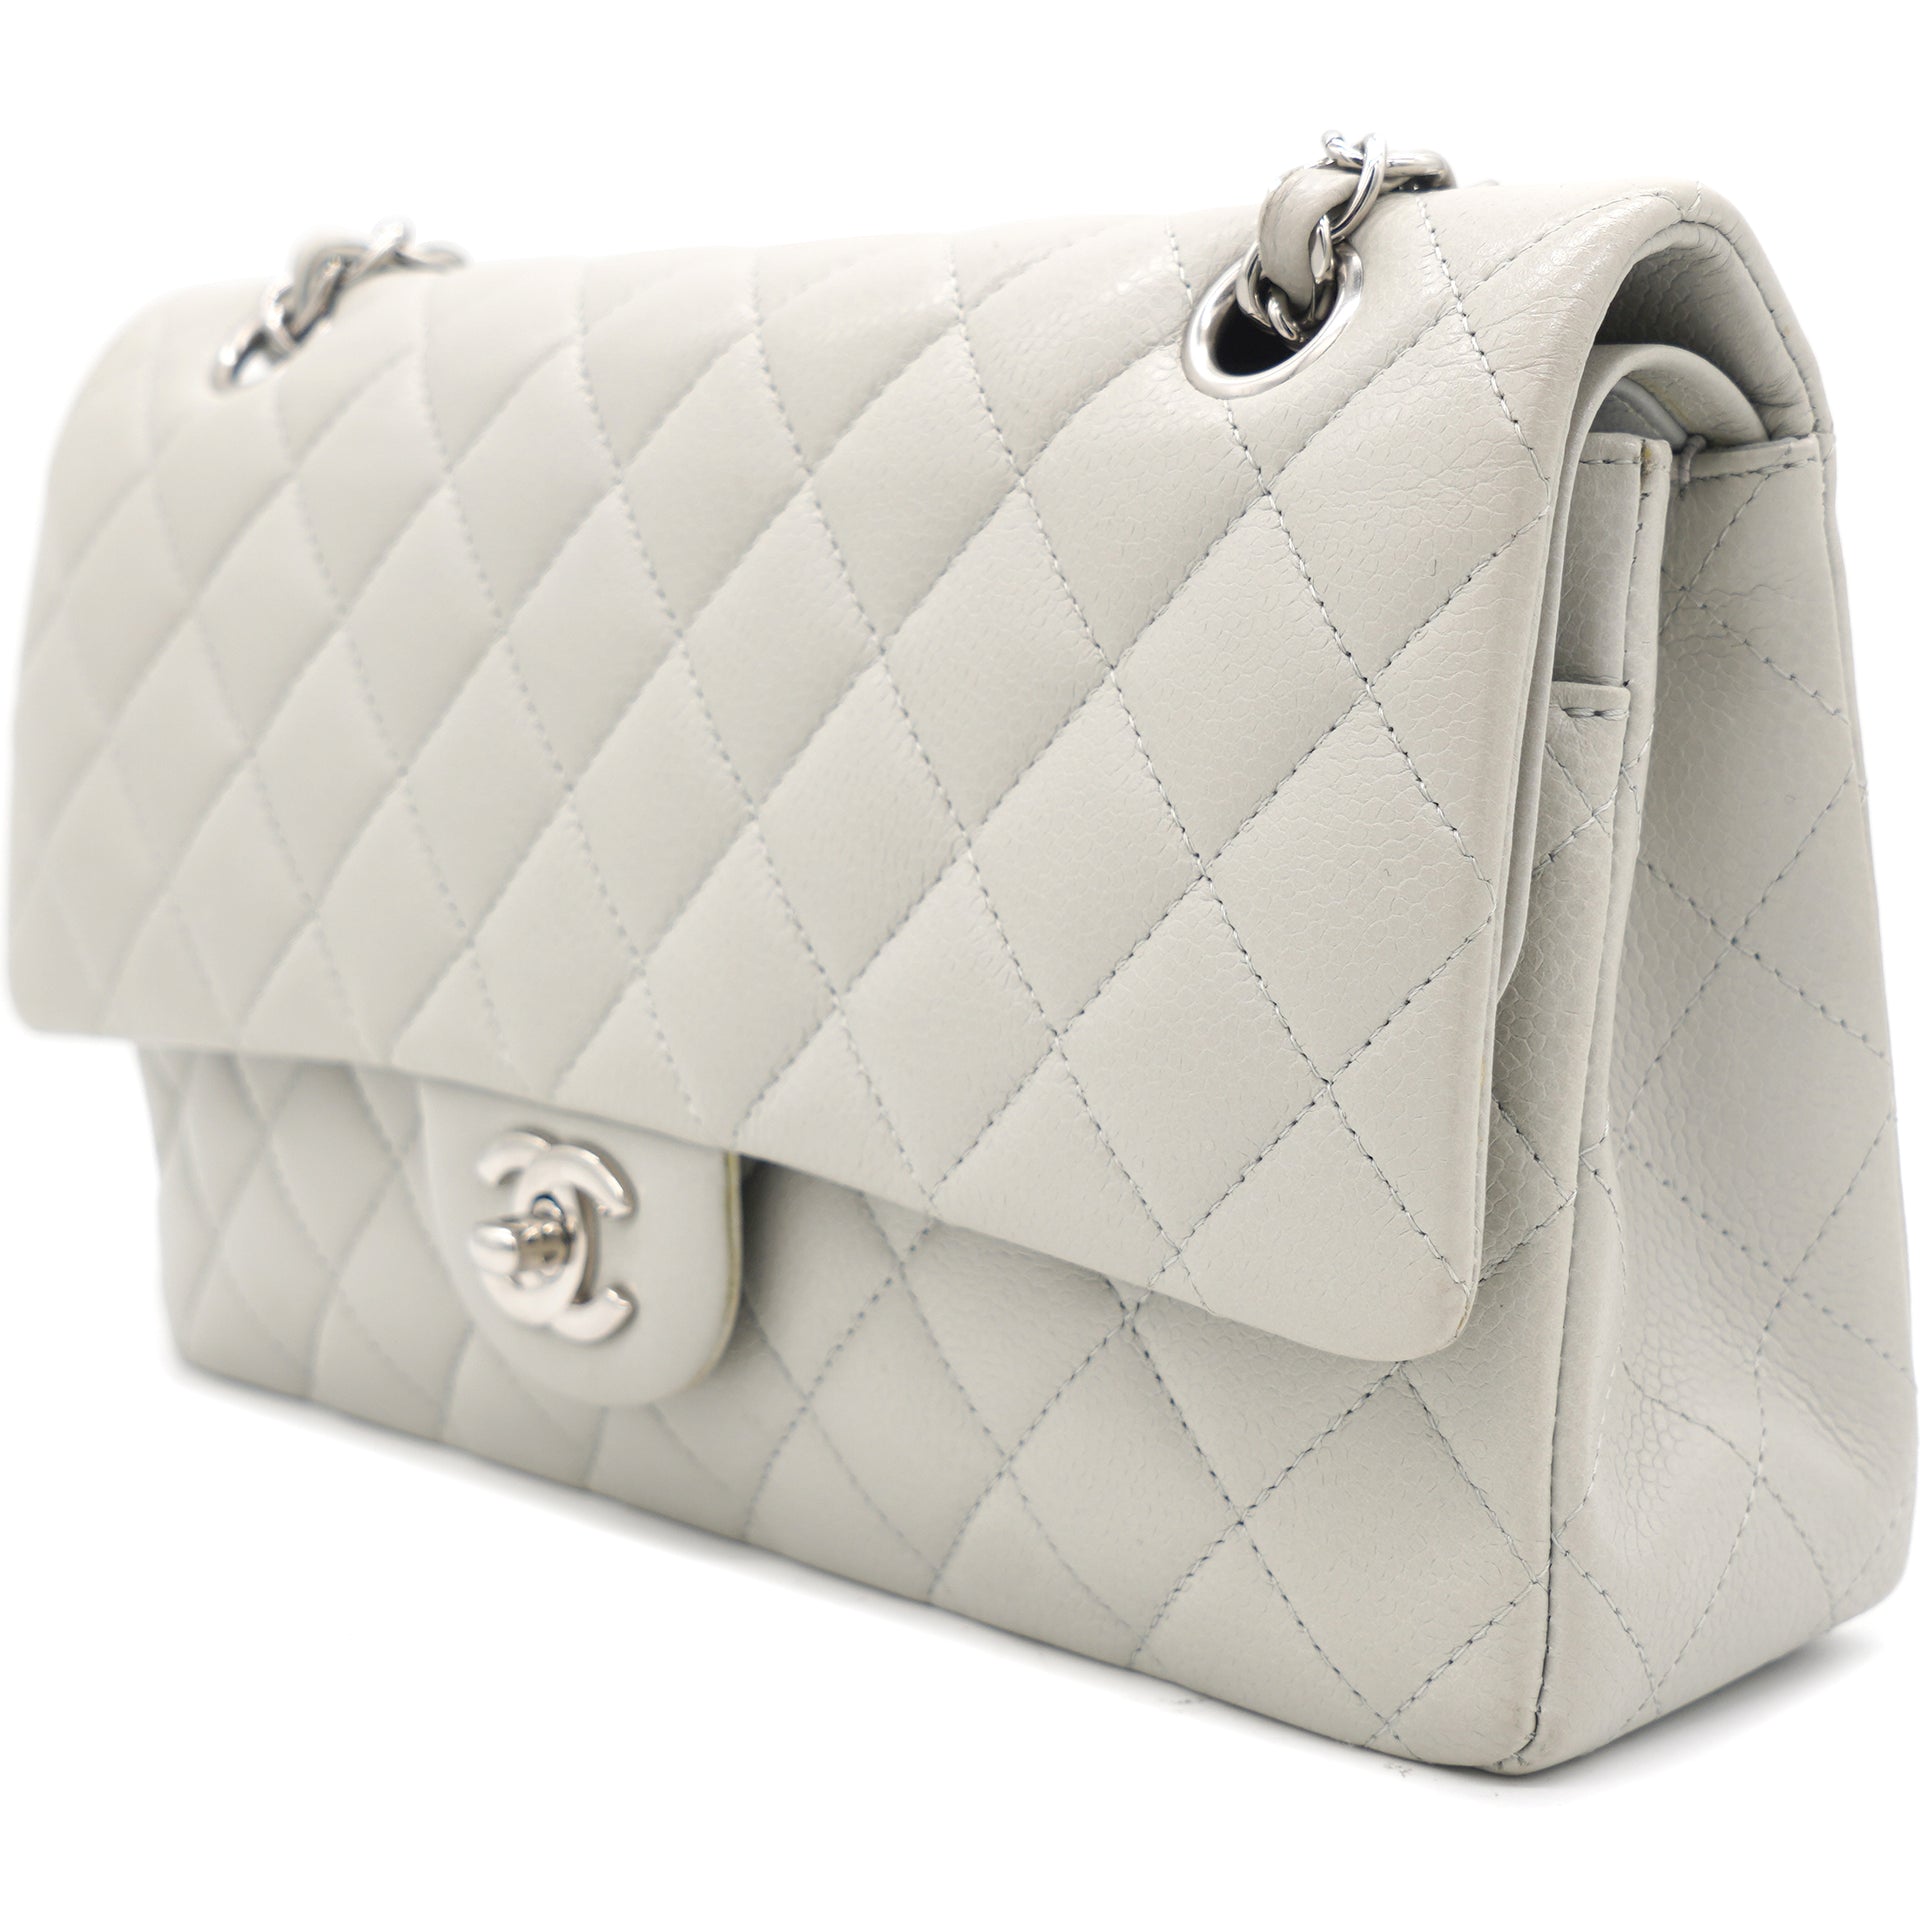 CHANEL Caviar Quilted Medium Double Flap Grey 212974